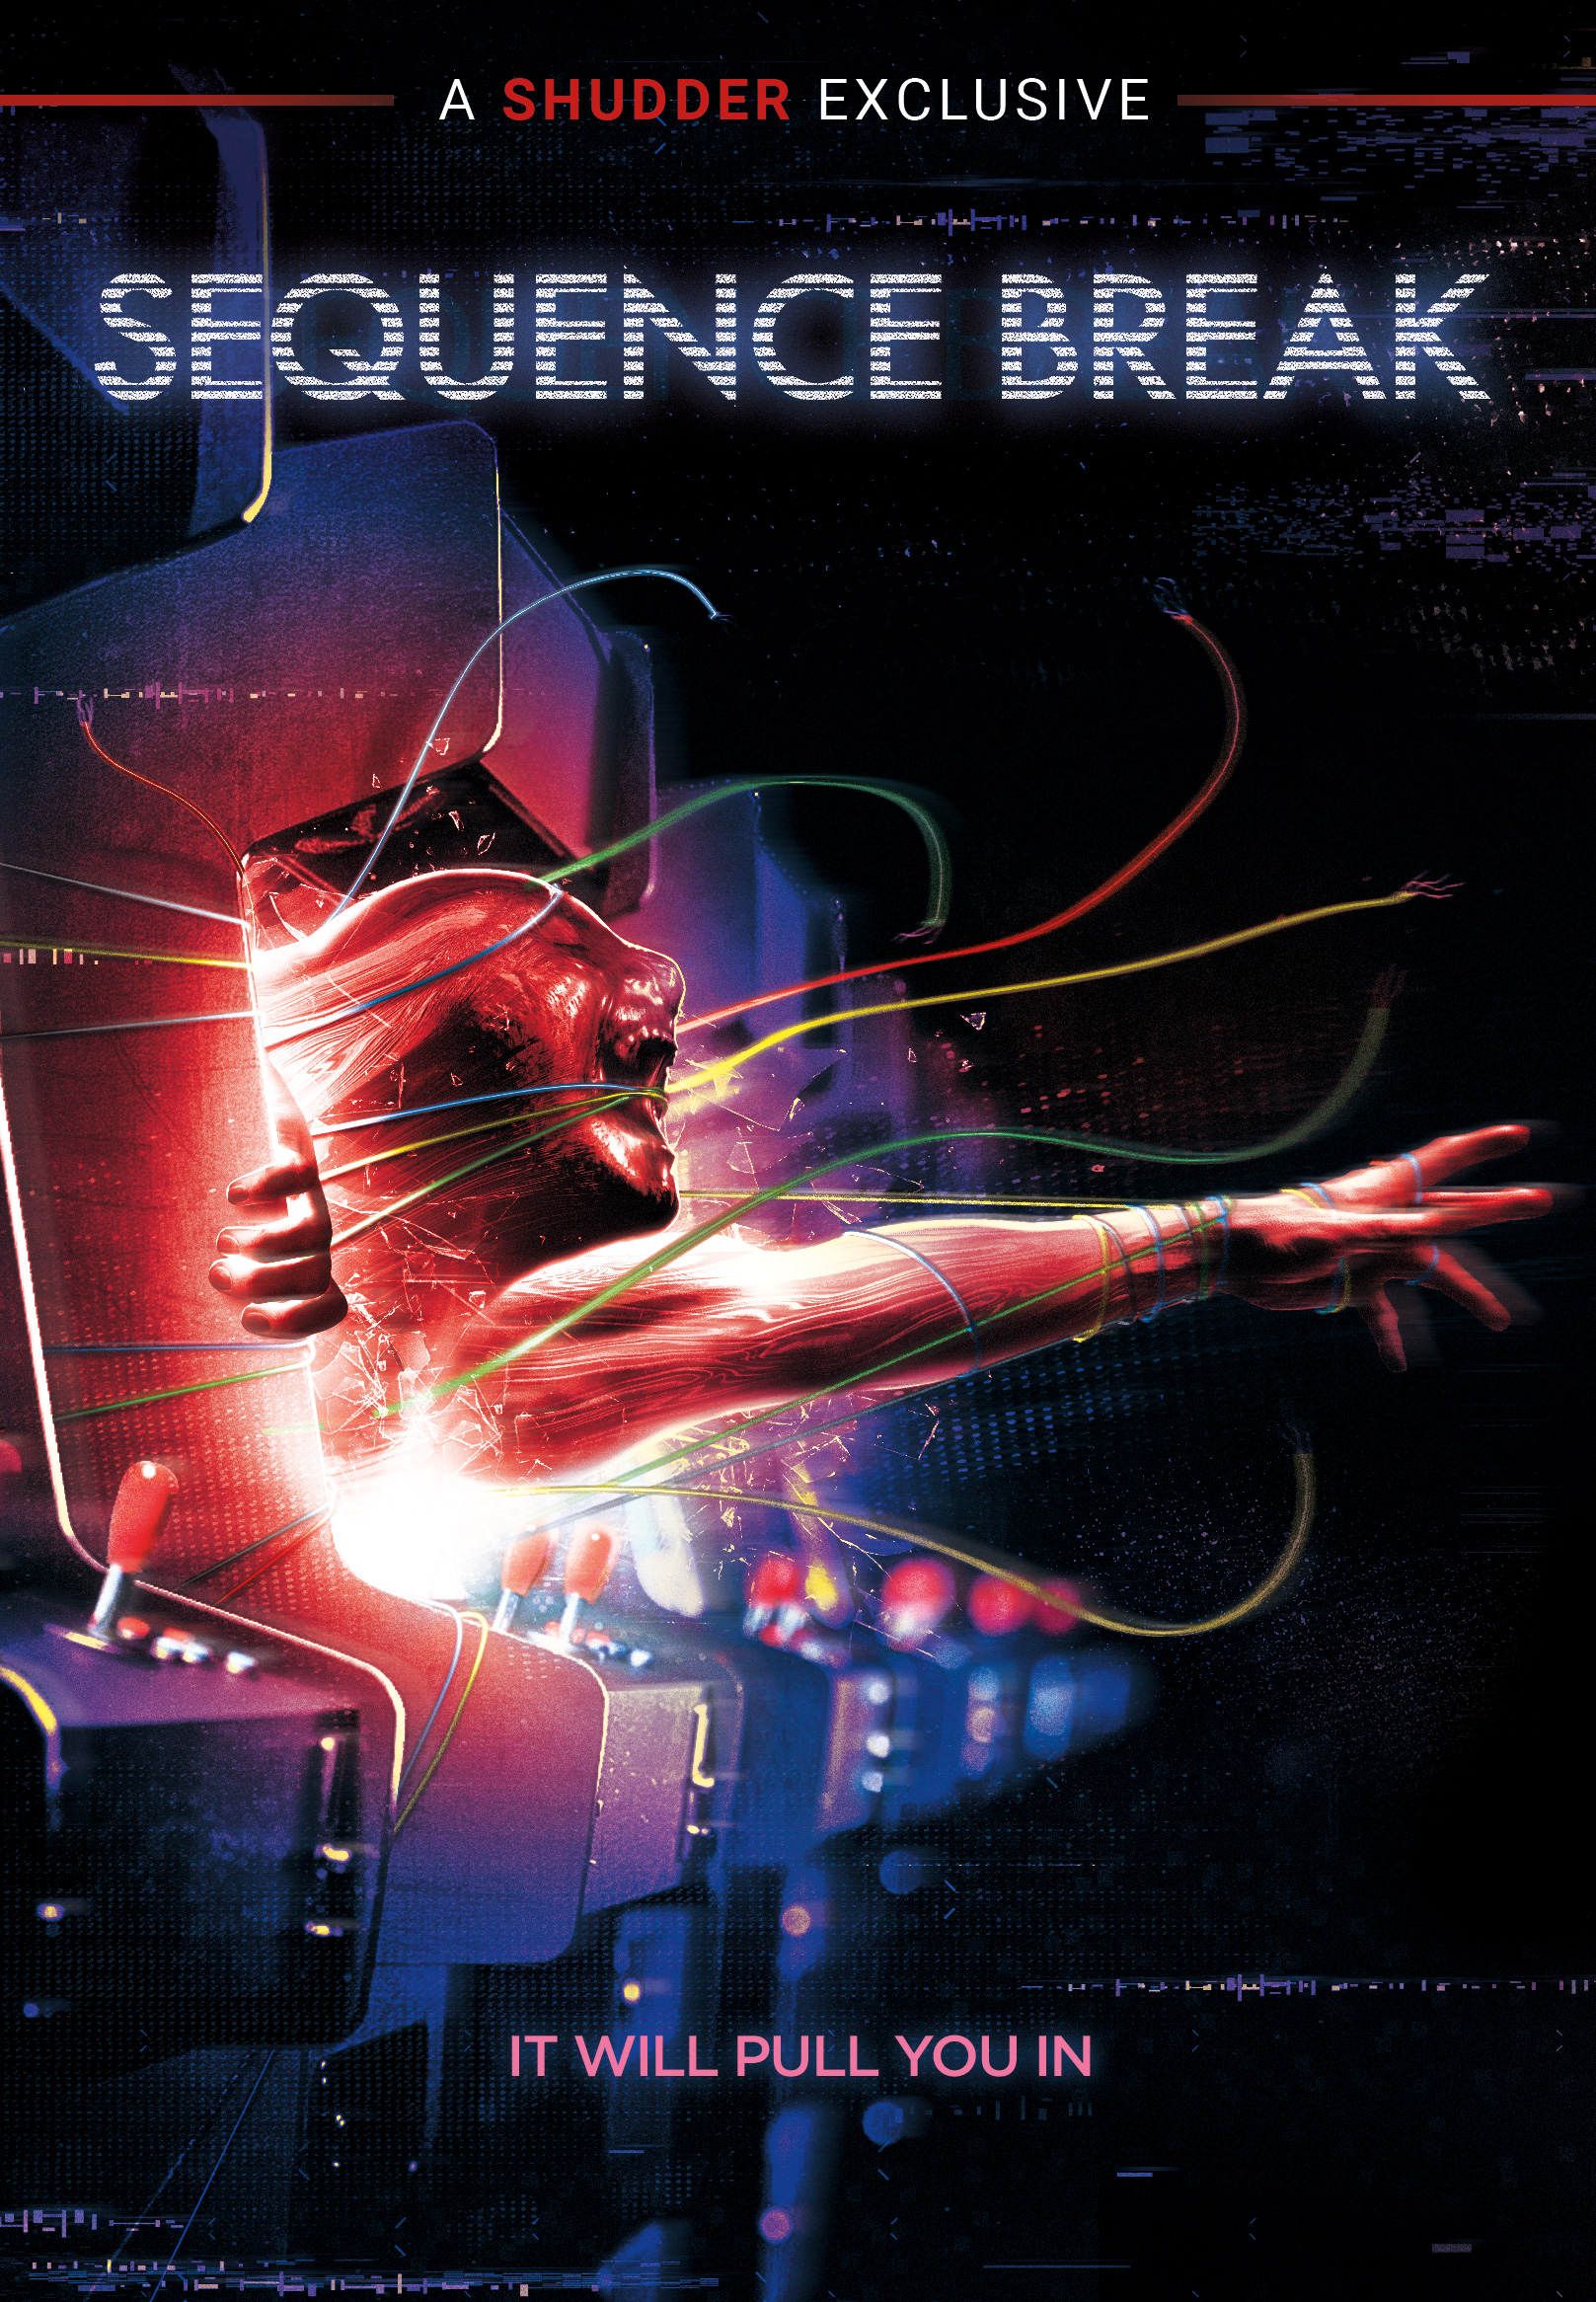 [News] SEQUENCE BREAK Available on VOD and Digital Tomorrow